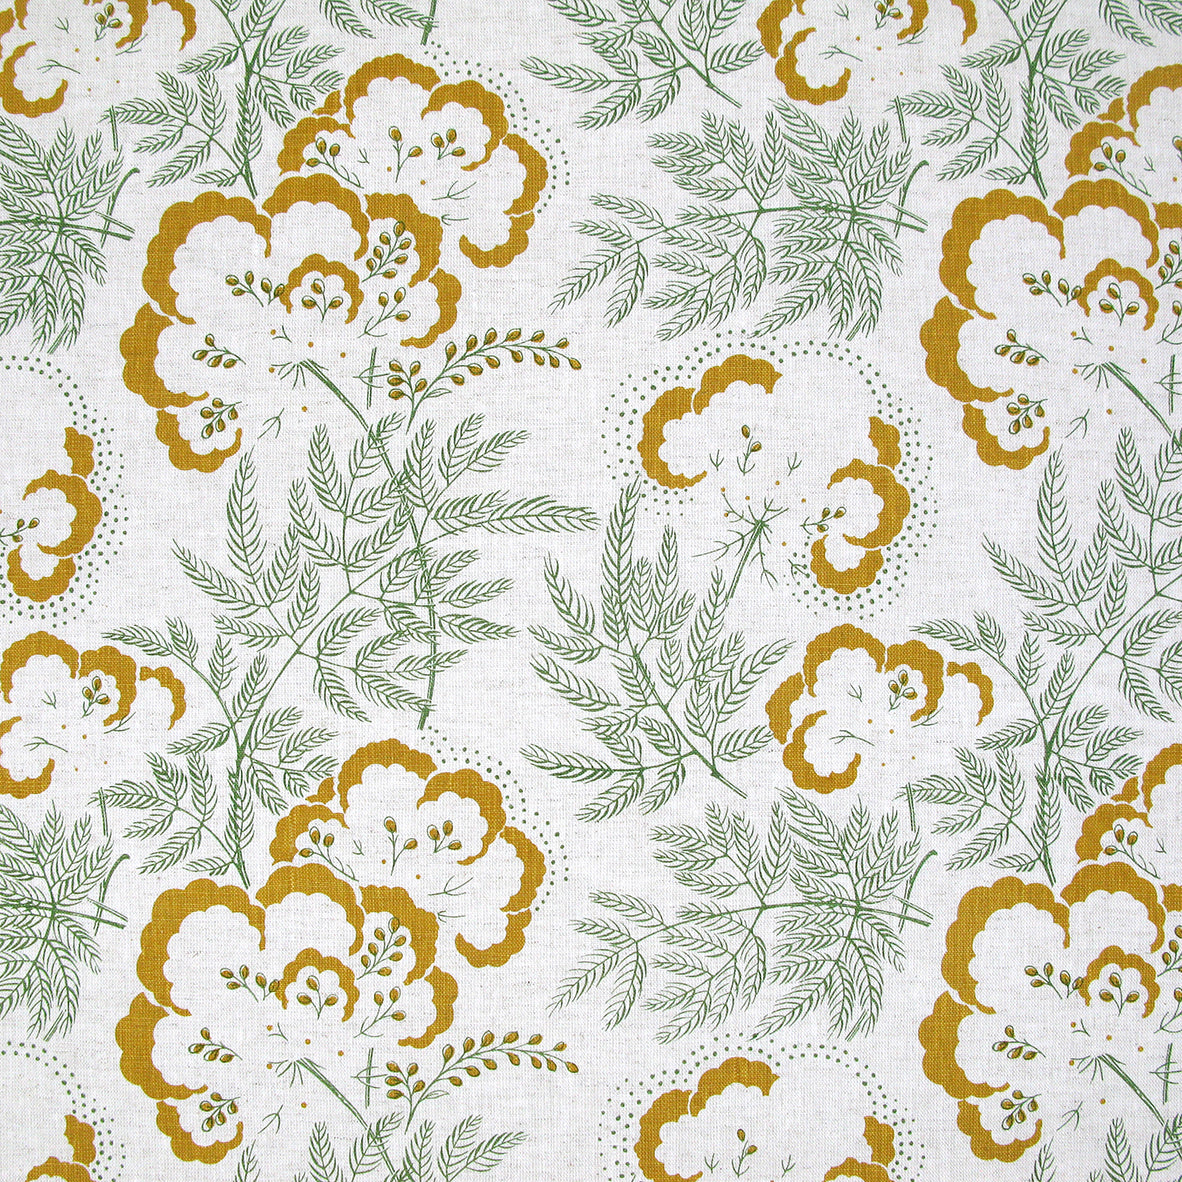 Detail of fabric in an intricate floral print in mustard and green on a white field.